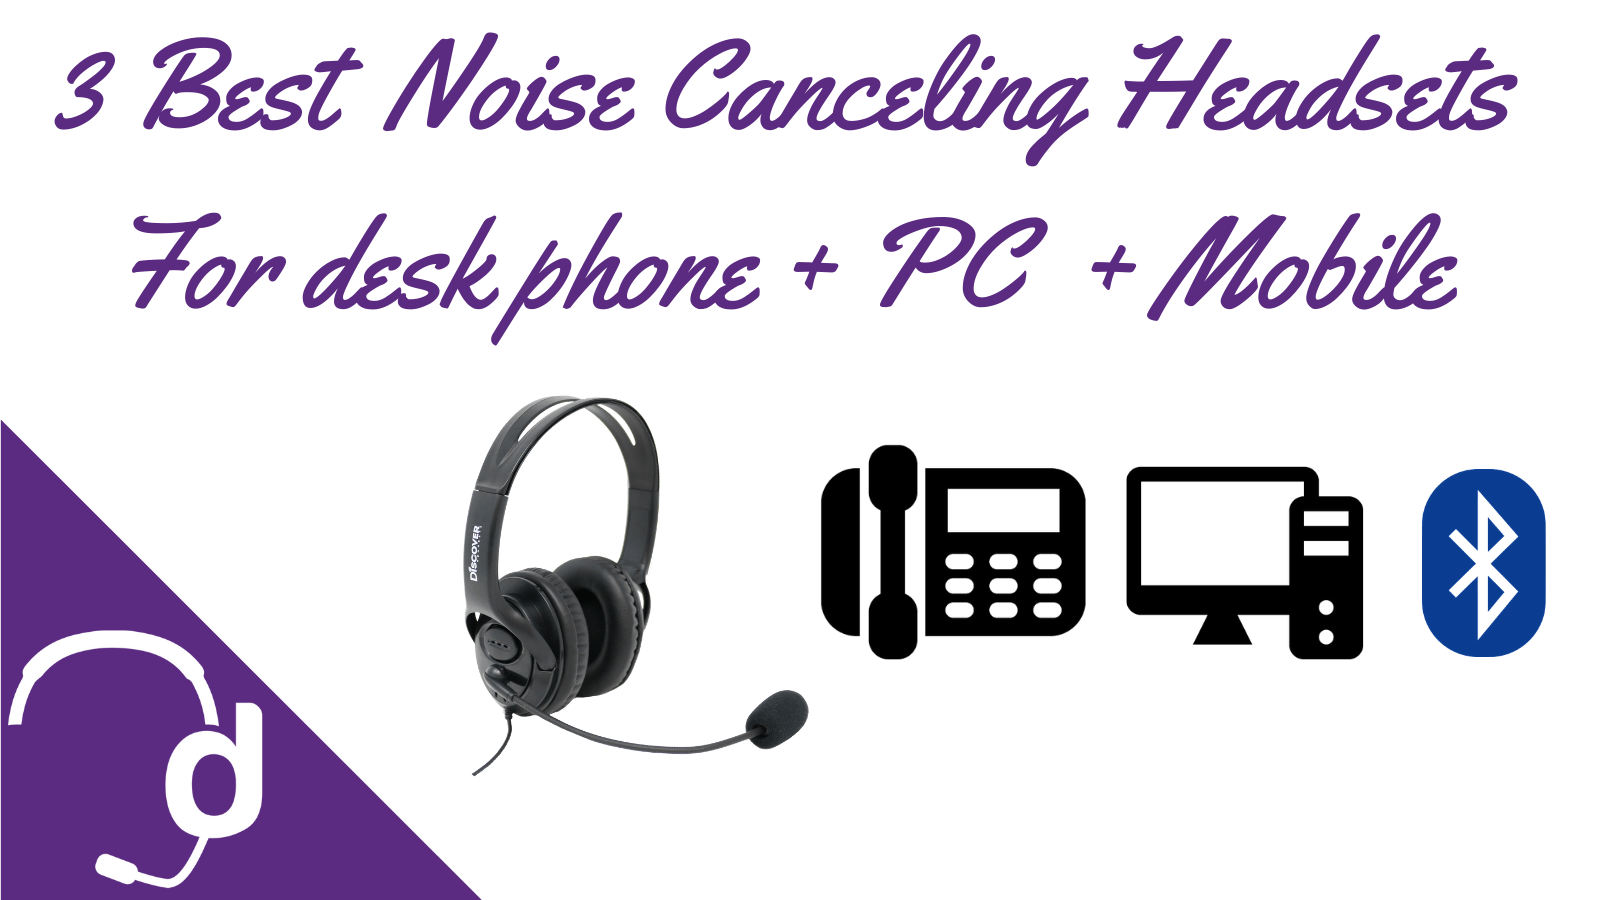 3 Best Noise Canceling Headsets For Call Centers Using Desk Phones + Computer + Bluetooth - Headset Advisor